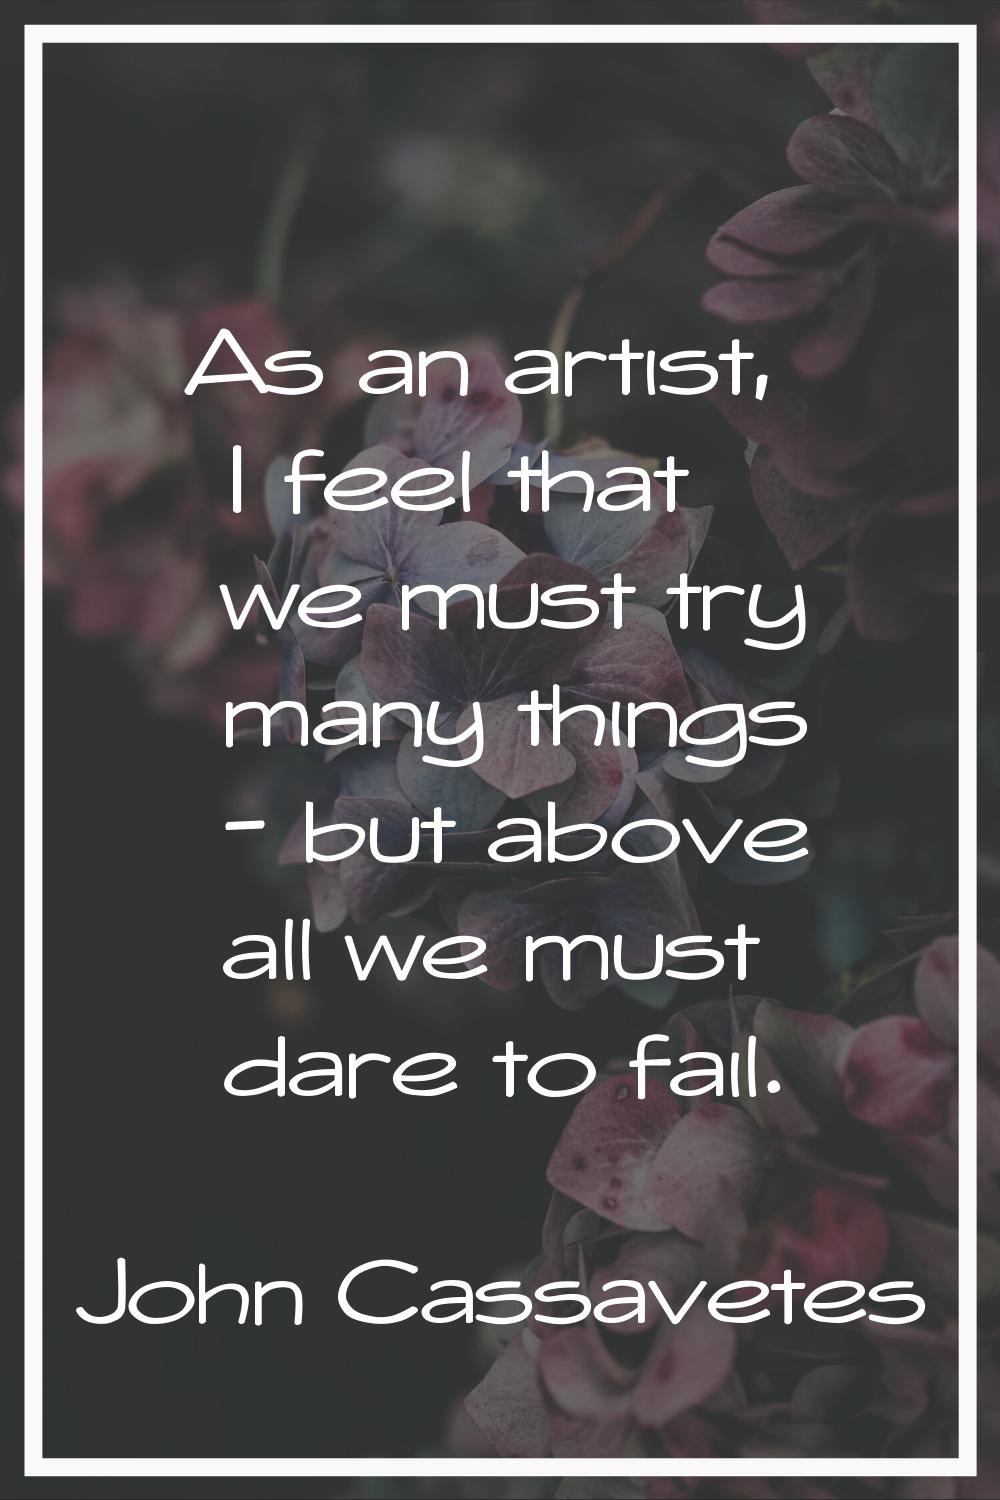 As an artist, I feel that we must try many things - but above all we must dare to fail.